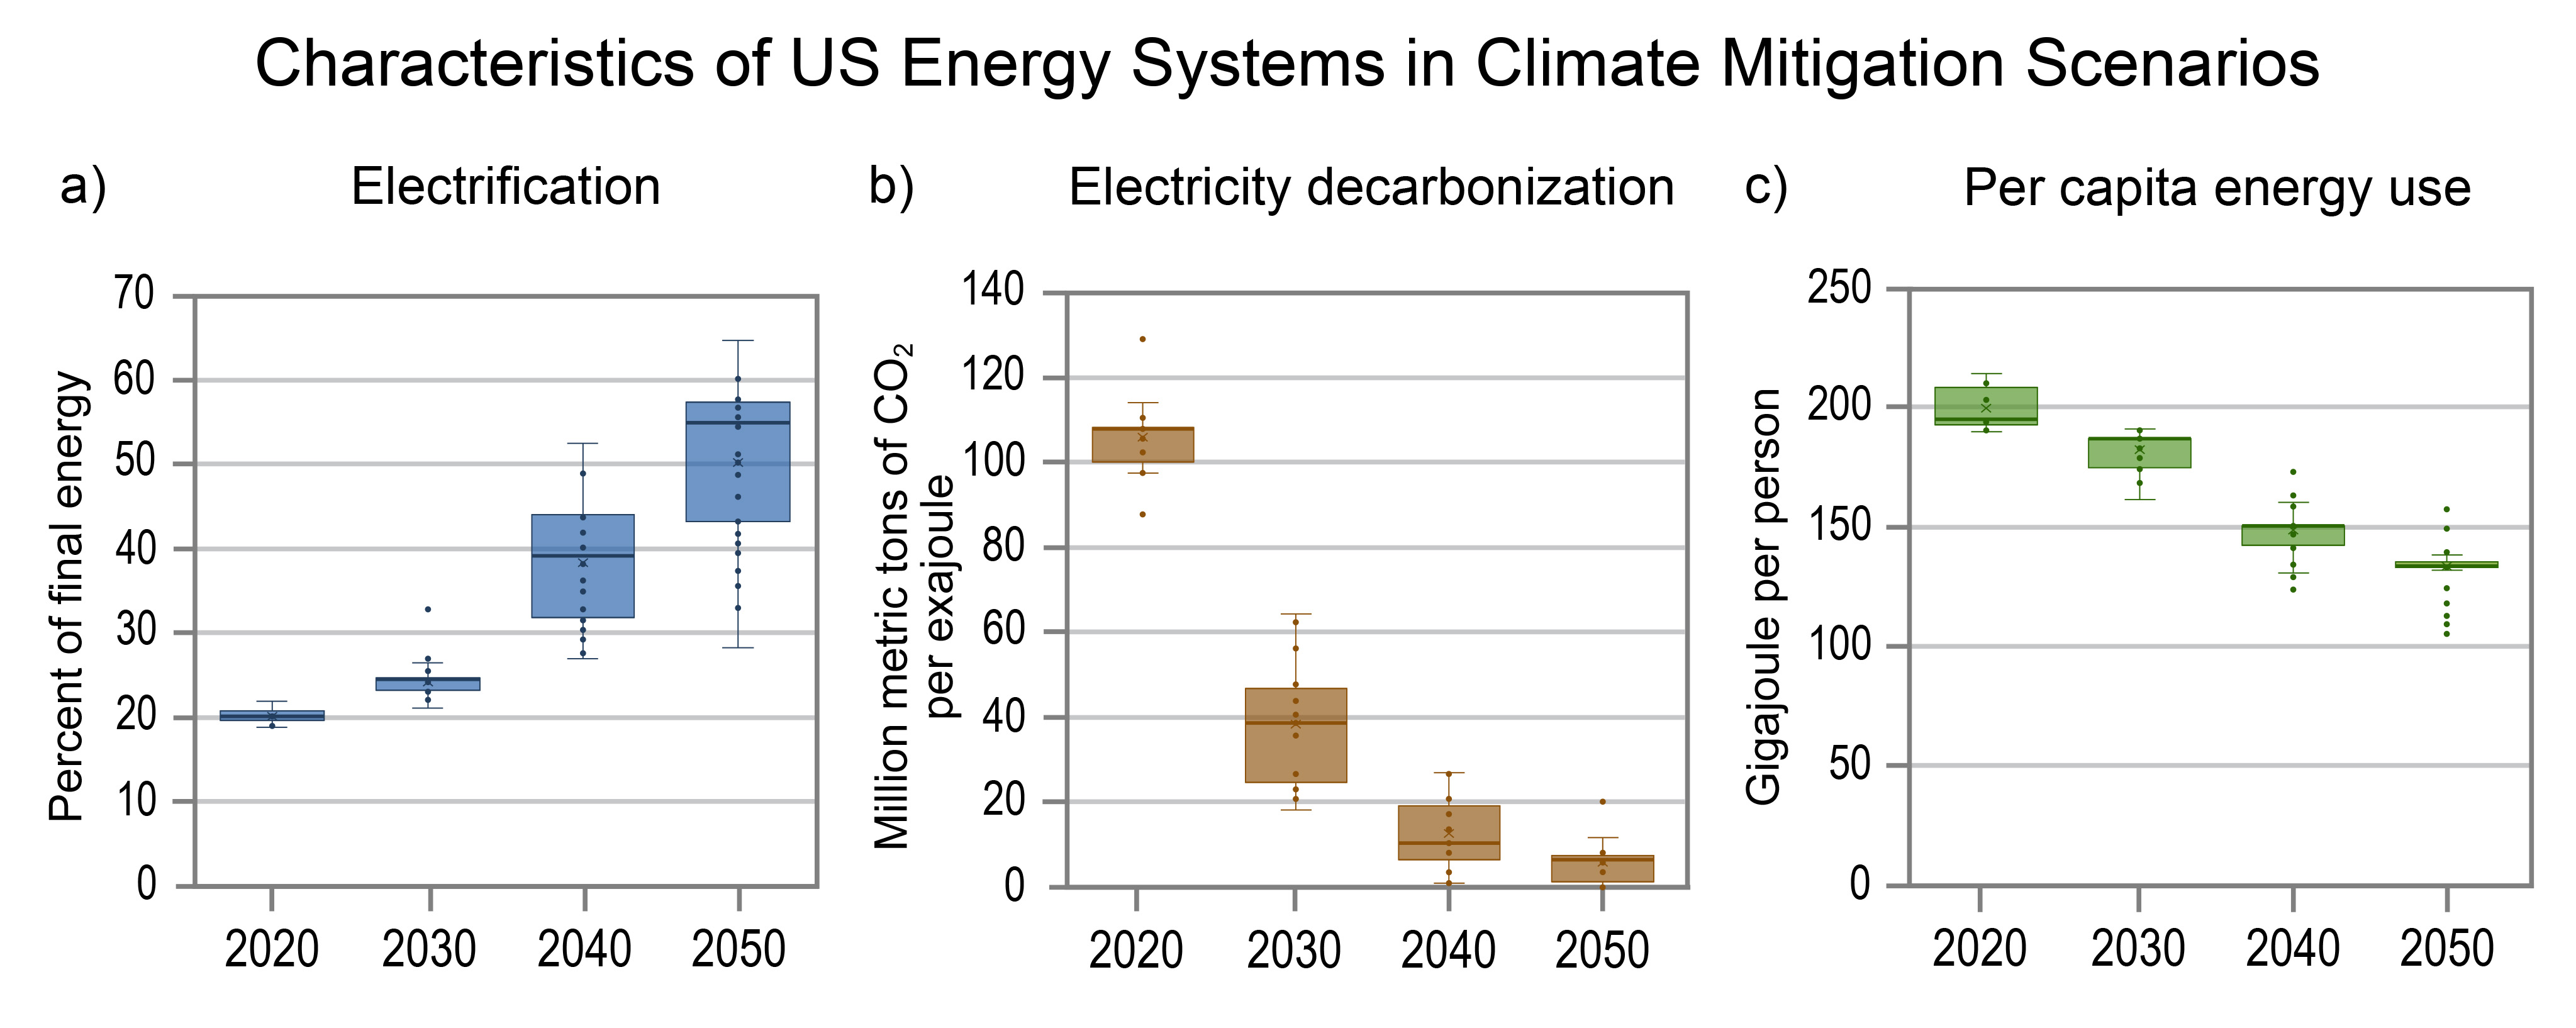 Characteristics of US Energy Systems in Climate Mitigation Scenarios